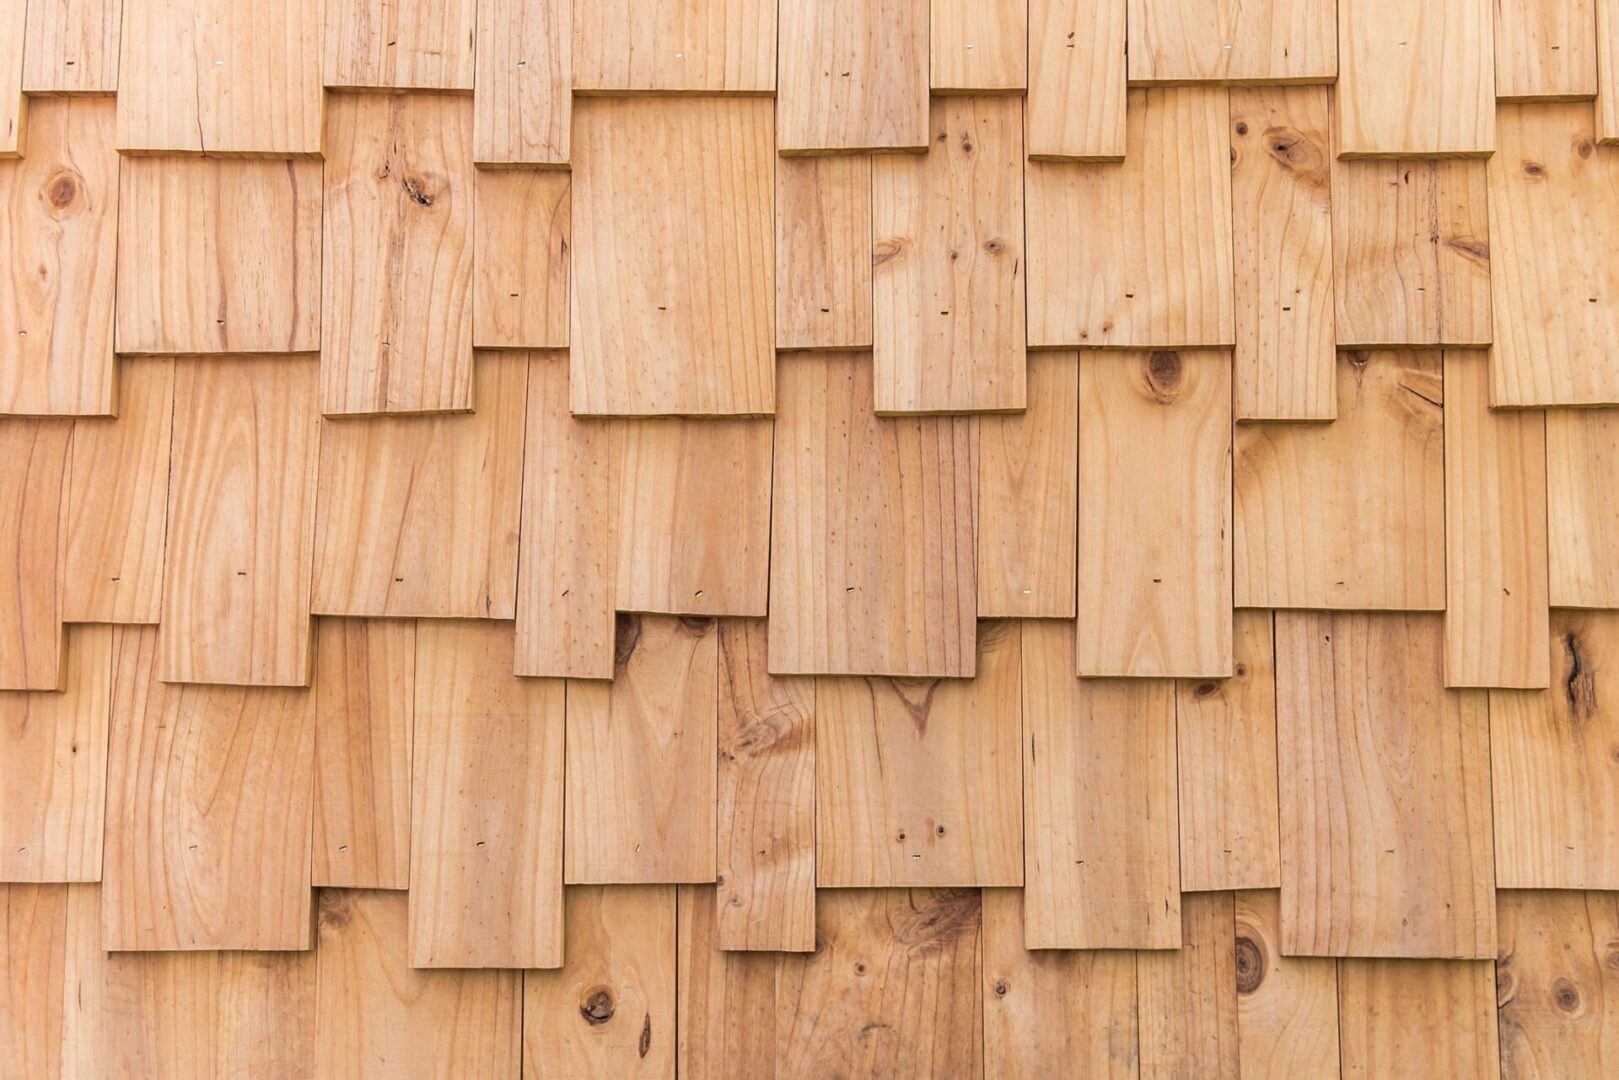 A close up of the wood shingles on a house